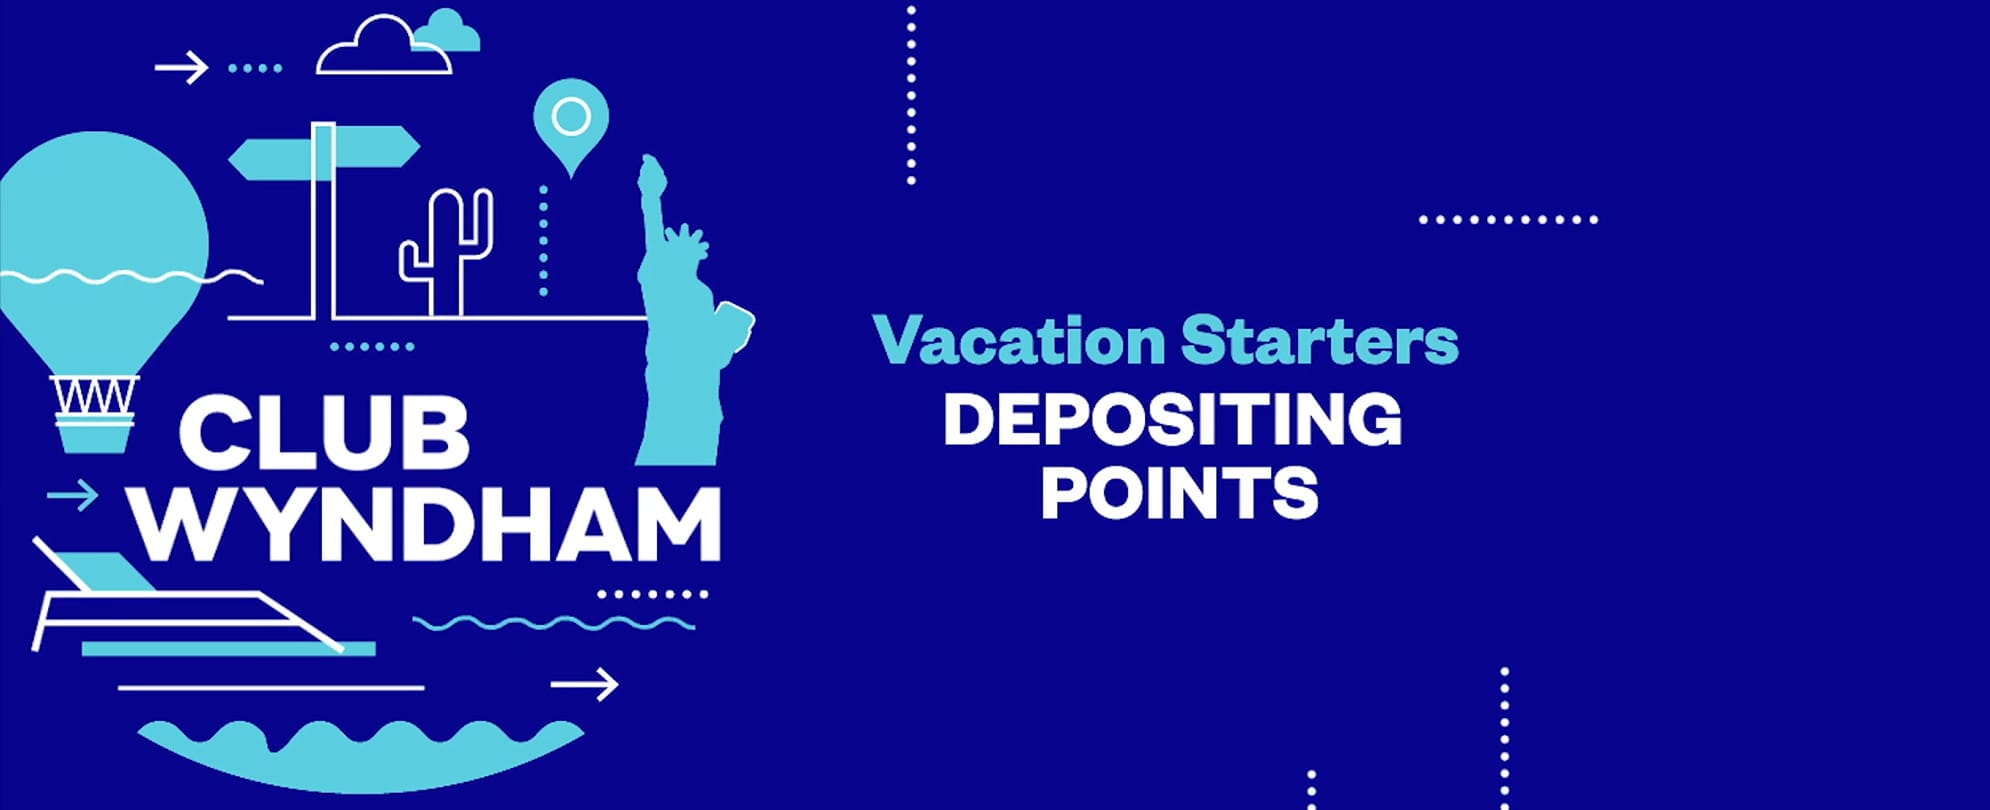 Depositing Points overview from the Club Wyndham Vacation Starters video series